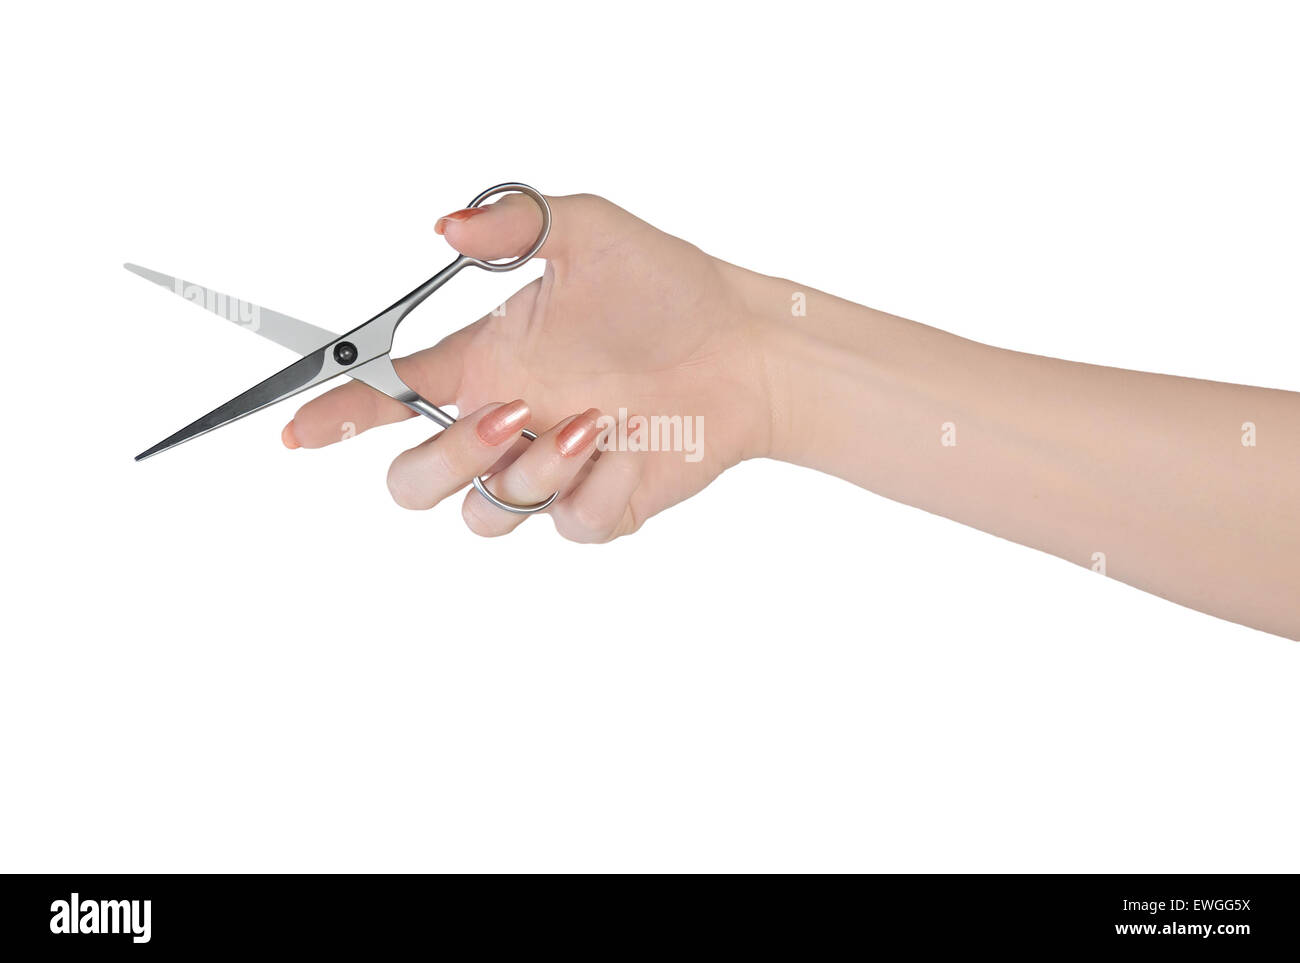 Crazy Hairdressing Scissors Fit for Beard Isolated on White Background  Stock Image - Image of crazy, close: 177745303